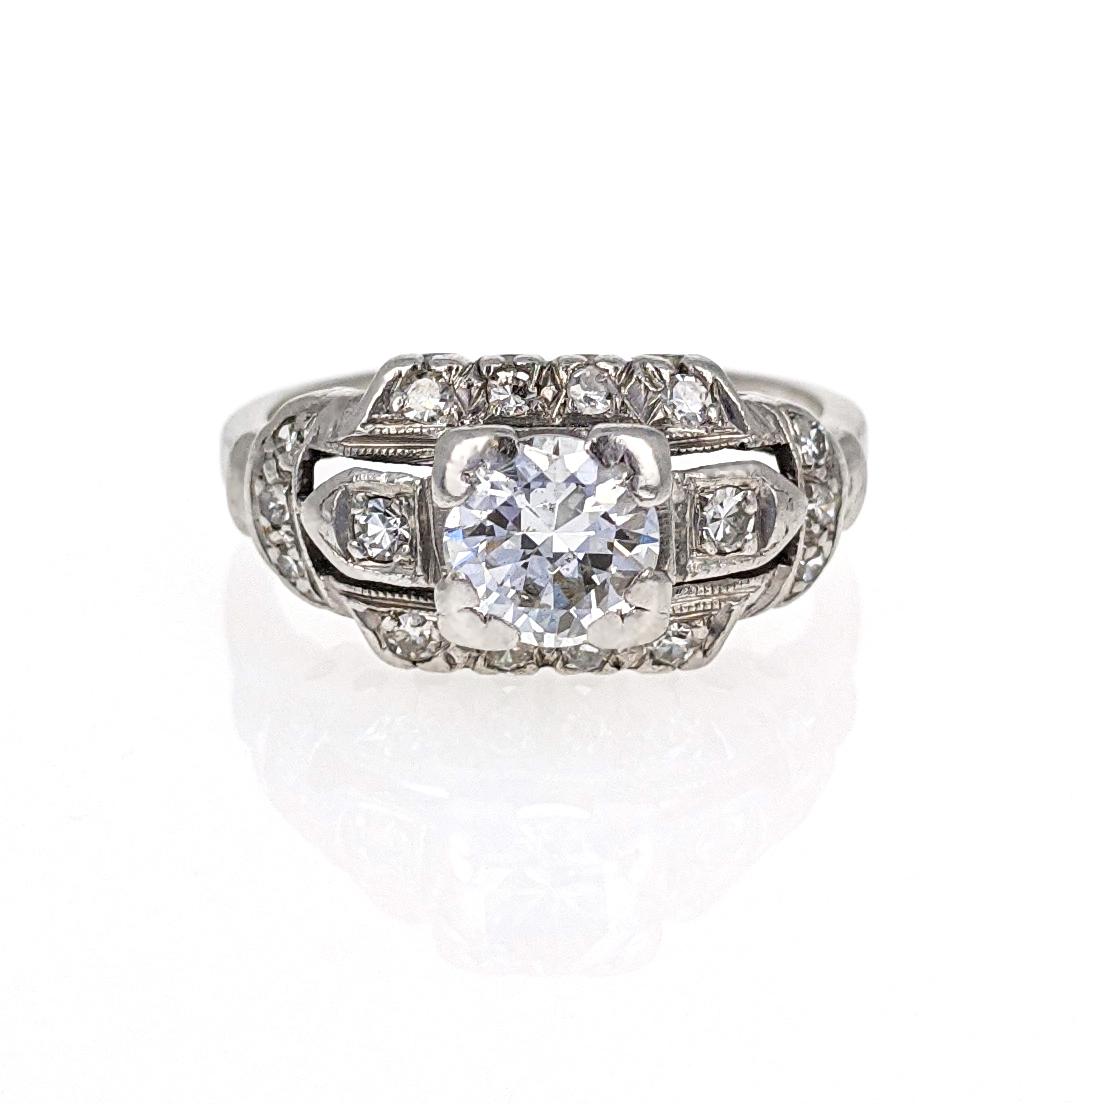 This beautiful Art Deco engagement ring features a round brilliant-cut diamond weighing approximately .75 carat with F-G color and SI clarity. It is accented by 16 single cut diamonds and artfully crafted in platinum with delicate millgrain